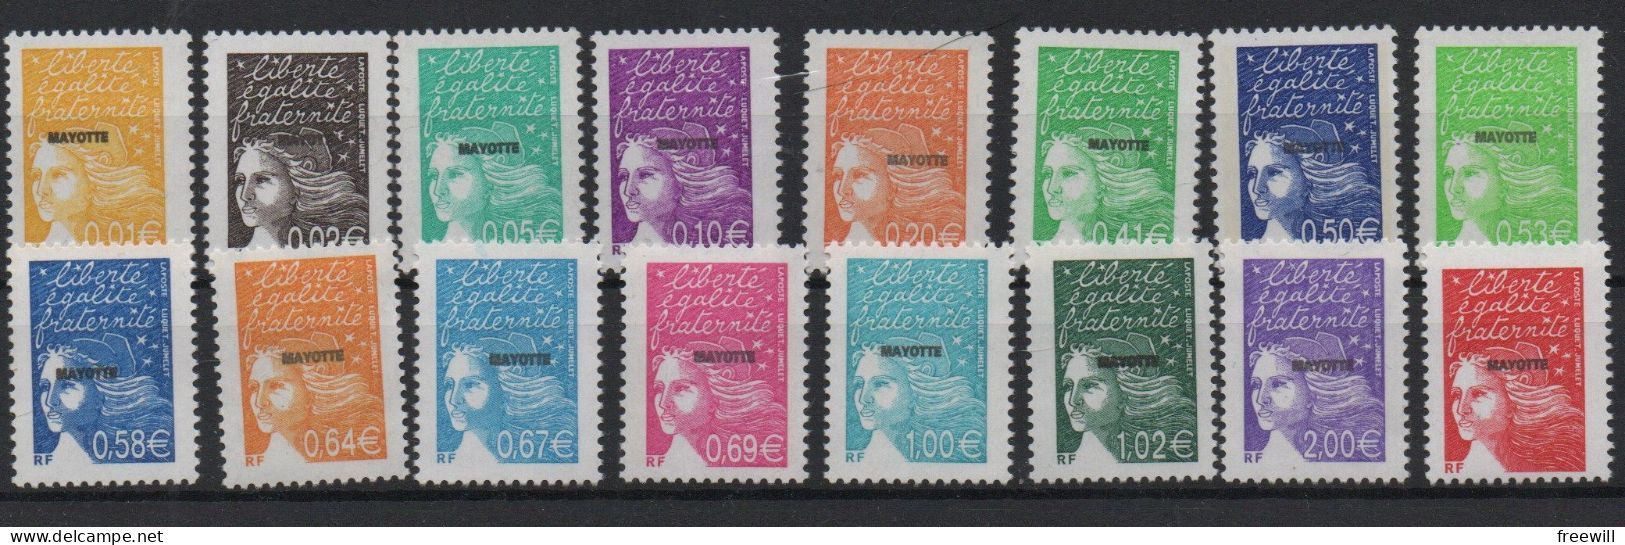 Mayotte Timbres Courants 2002 XXX - Unused Stamps